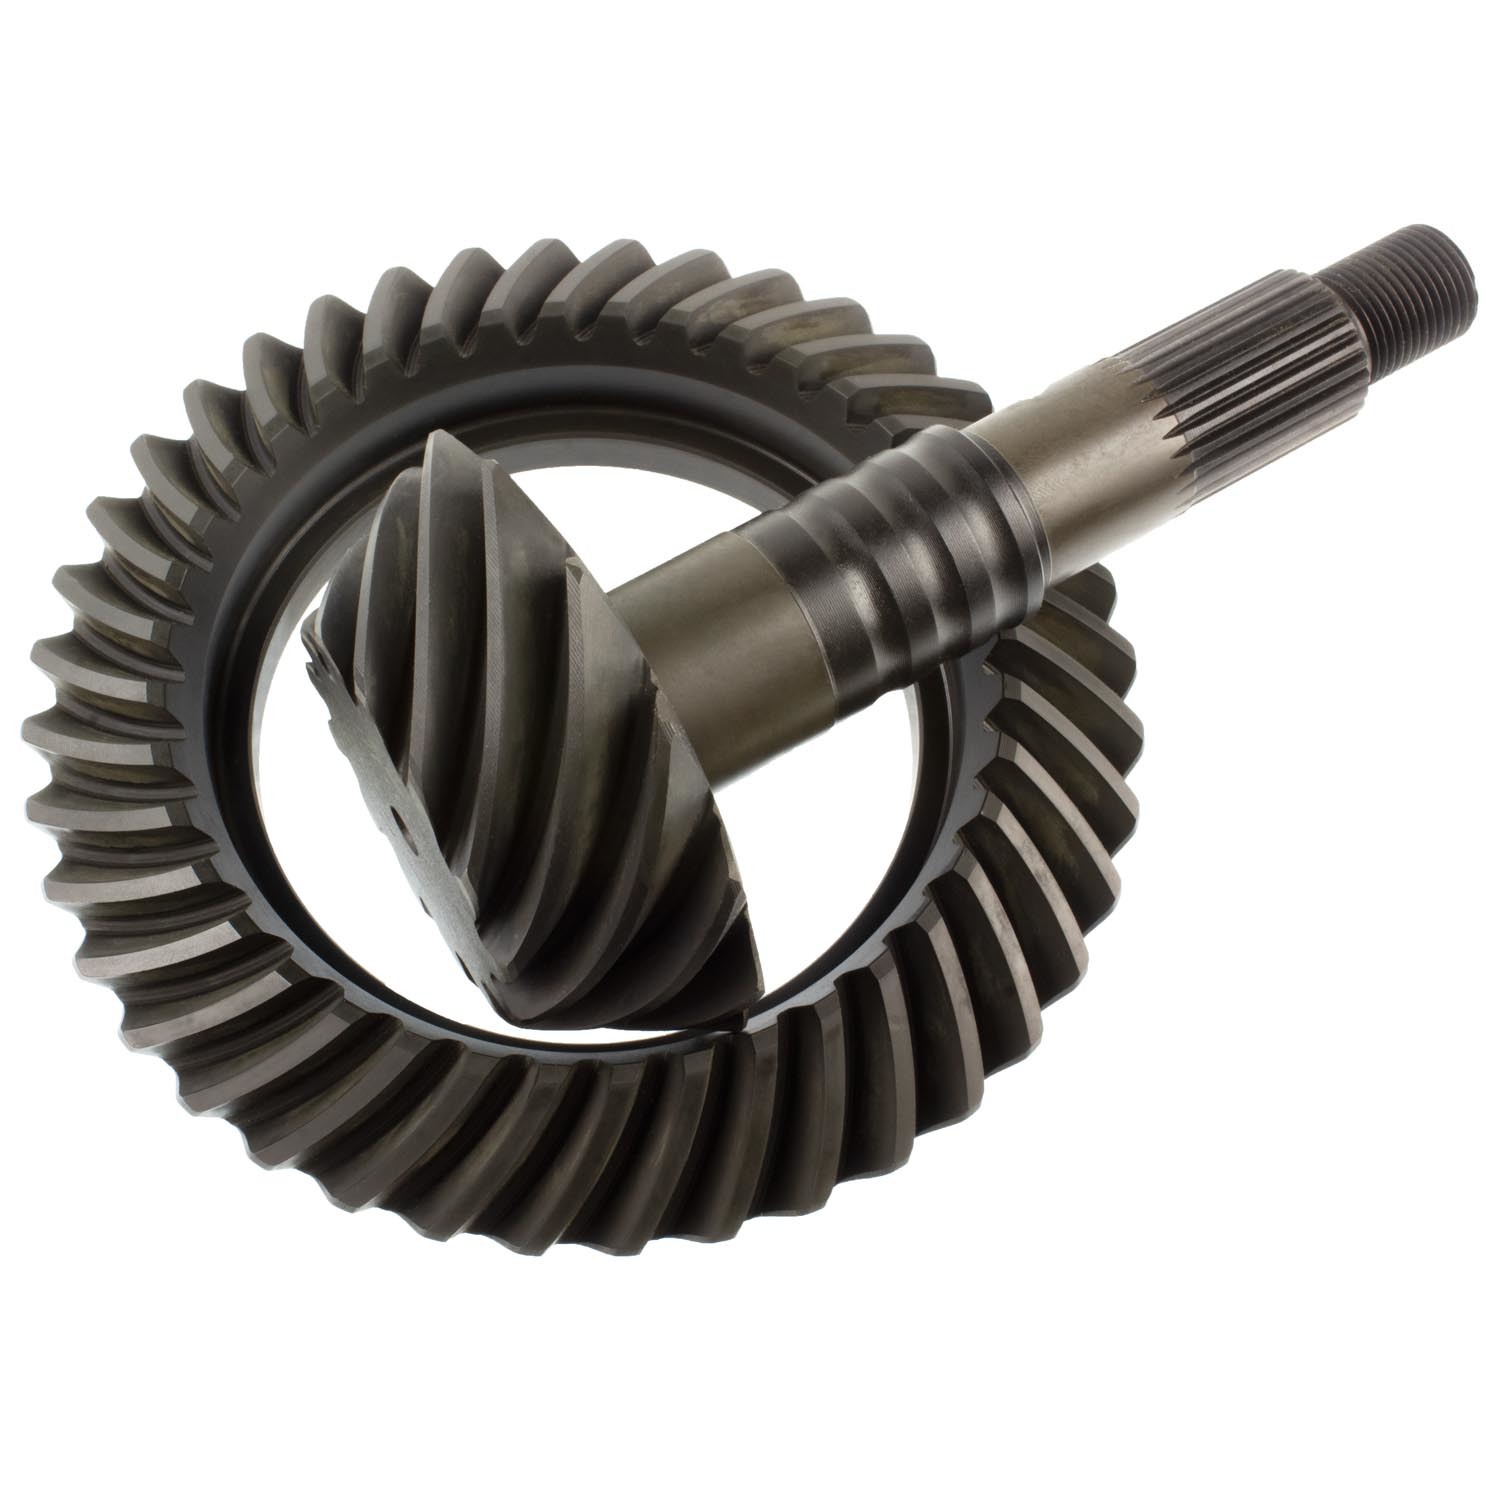 Richmond Gear 49-0001-1 Ring and Pinion GM 7.5" 7.625" 3.08 Ring Ratio, 1 Pack